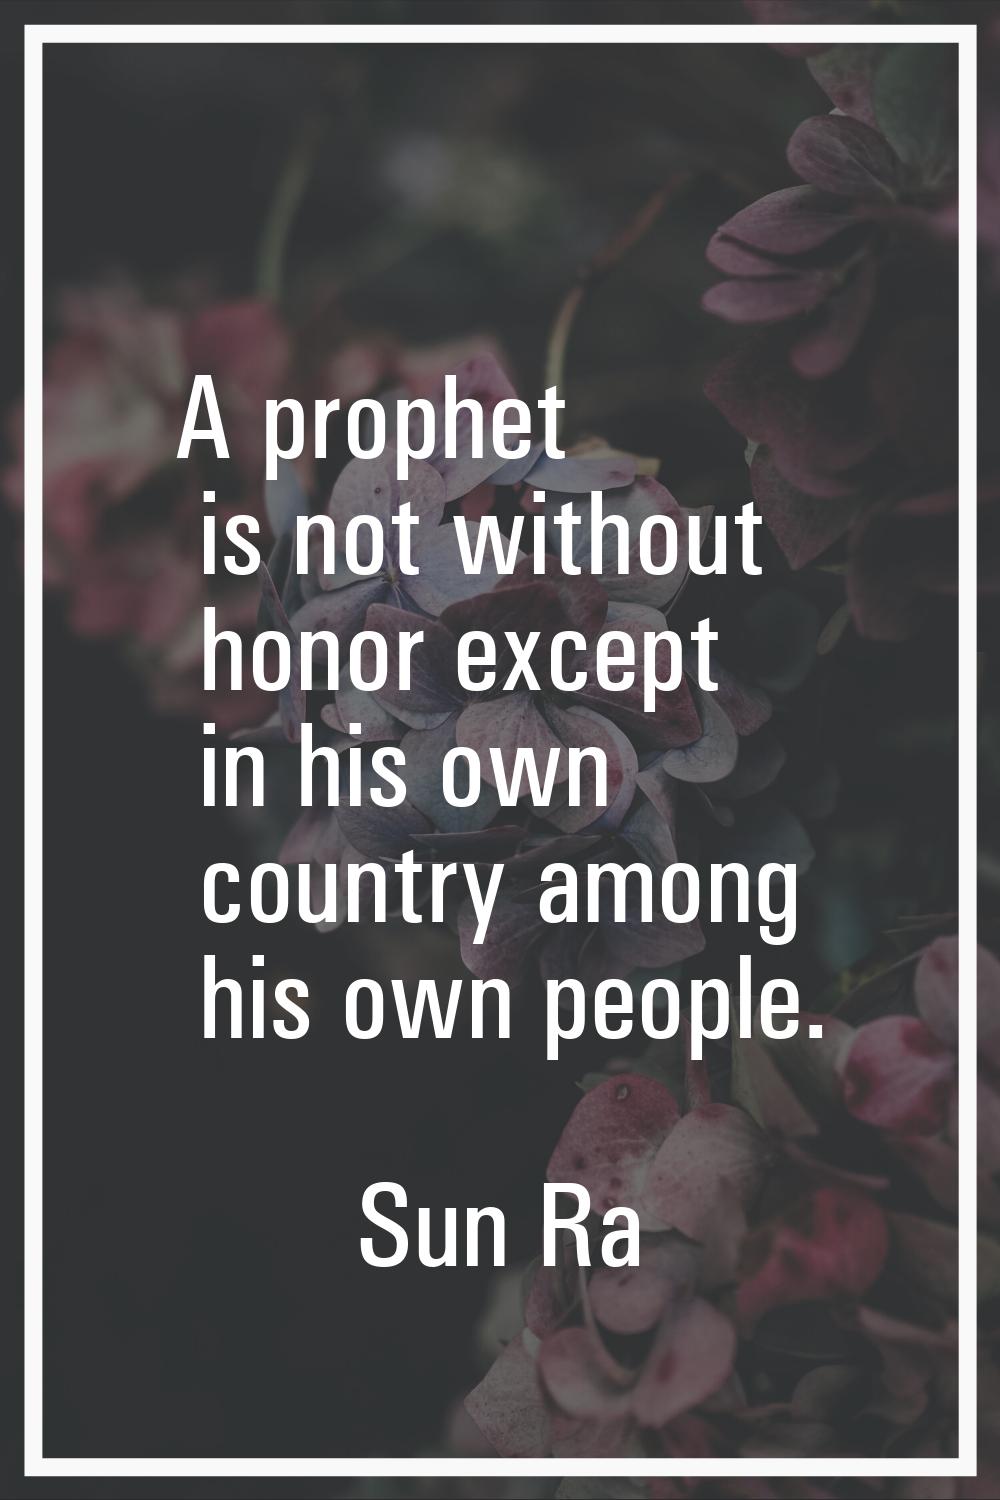 A prophet is not without honor except in his own country among his own people.